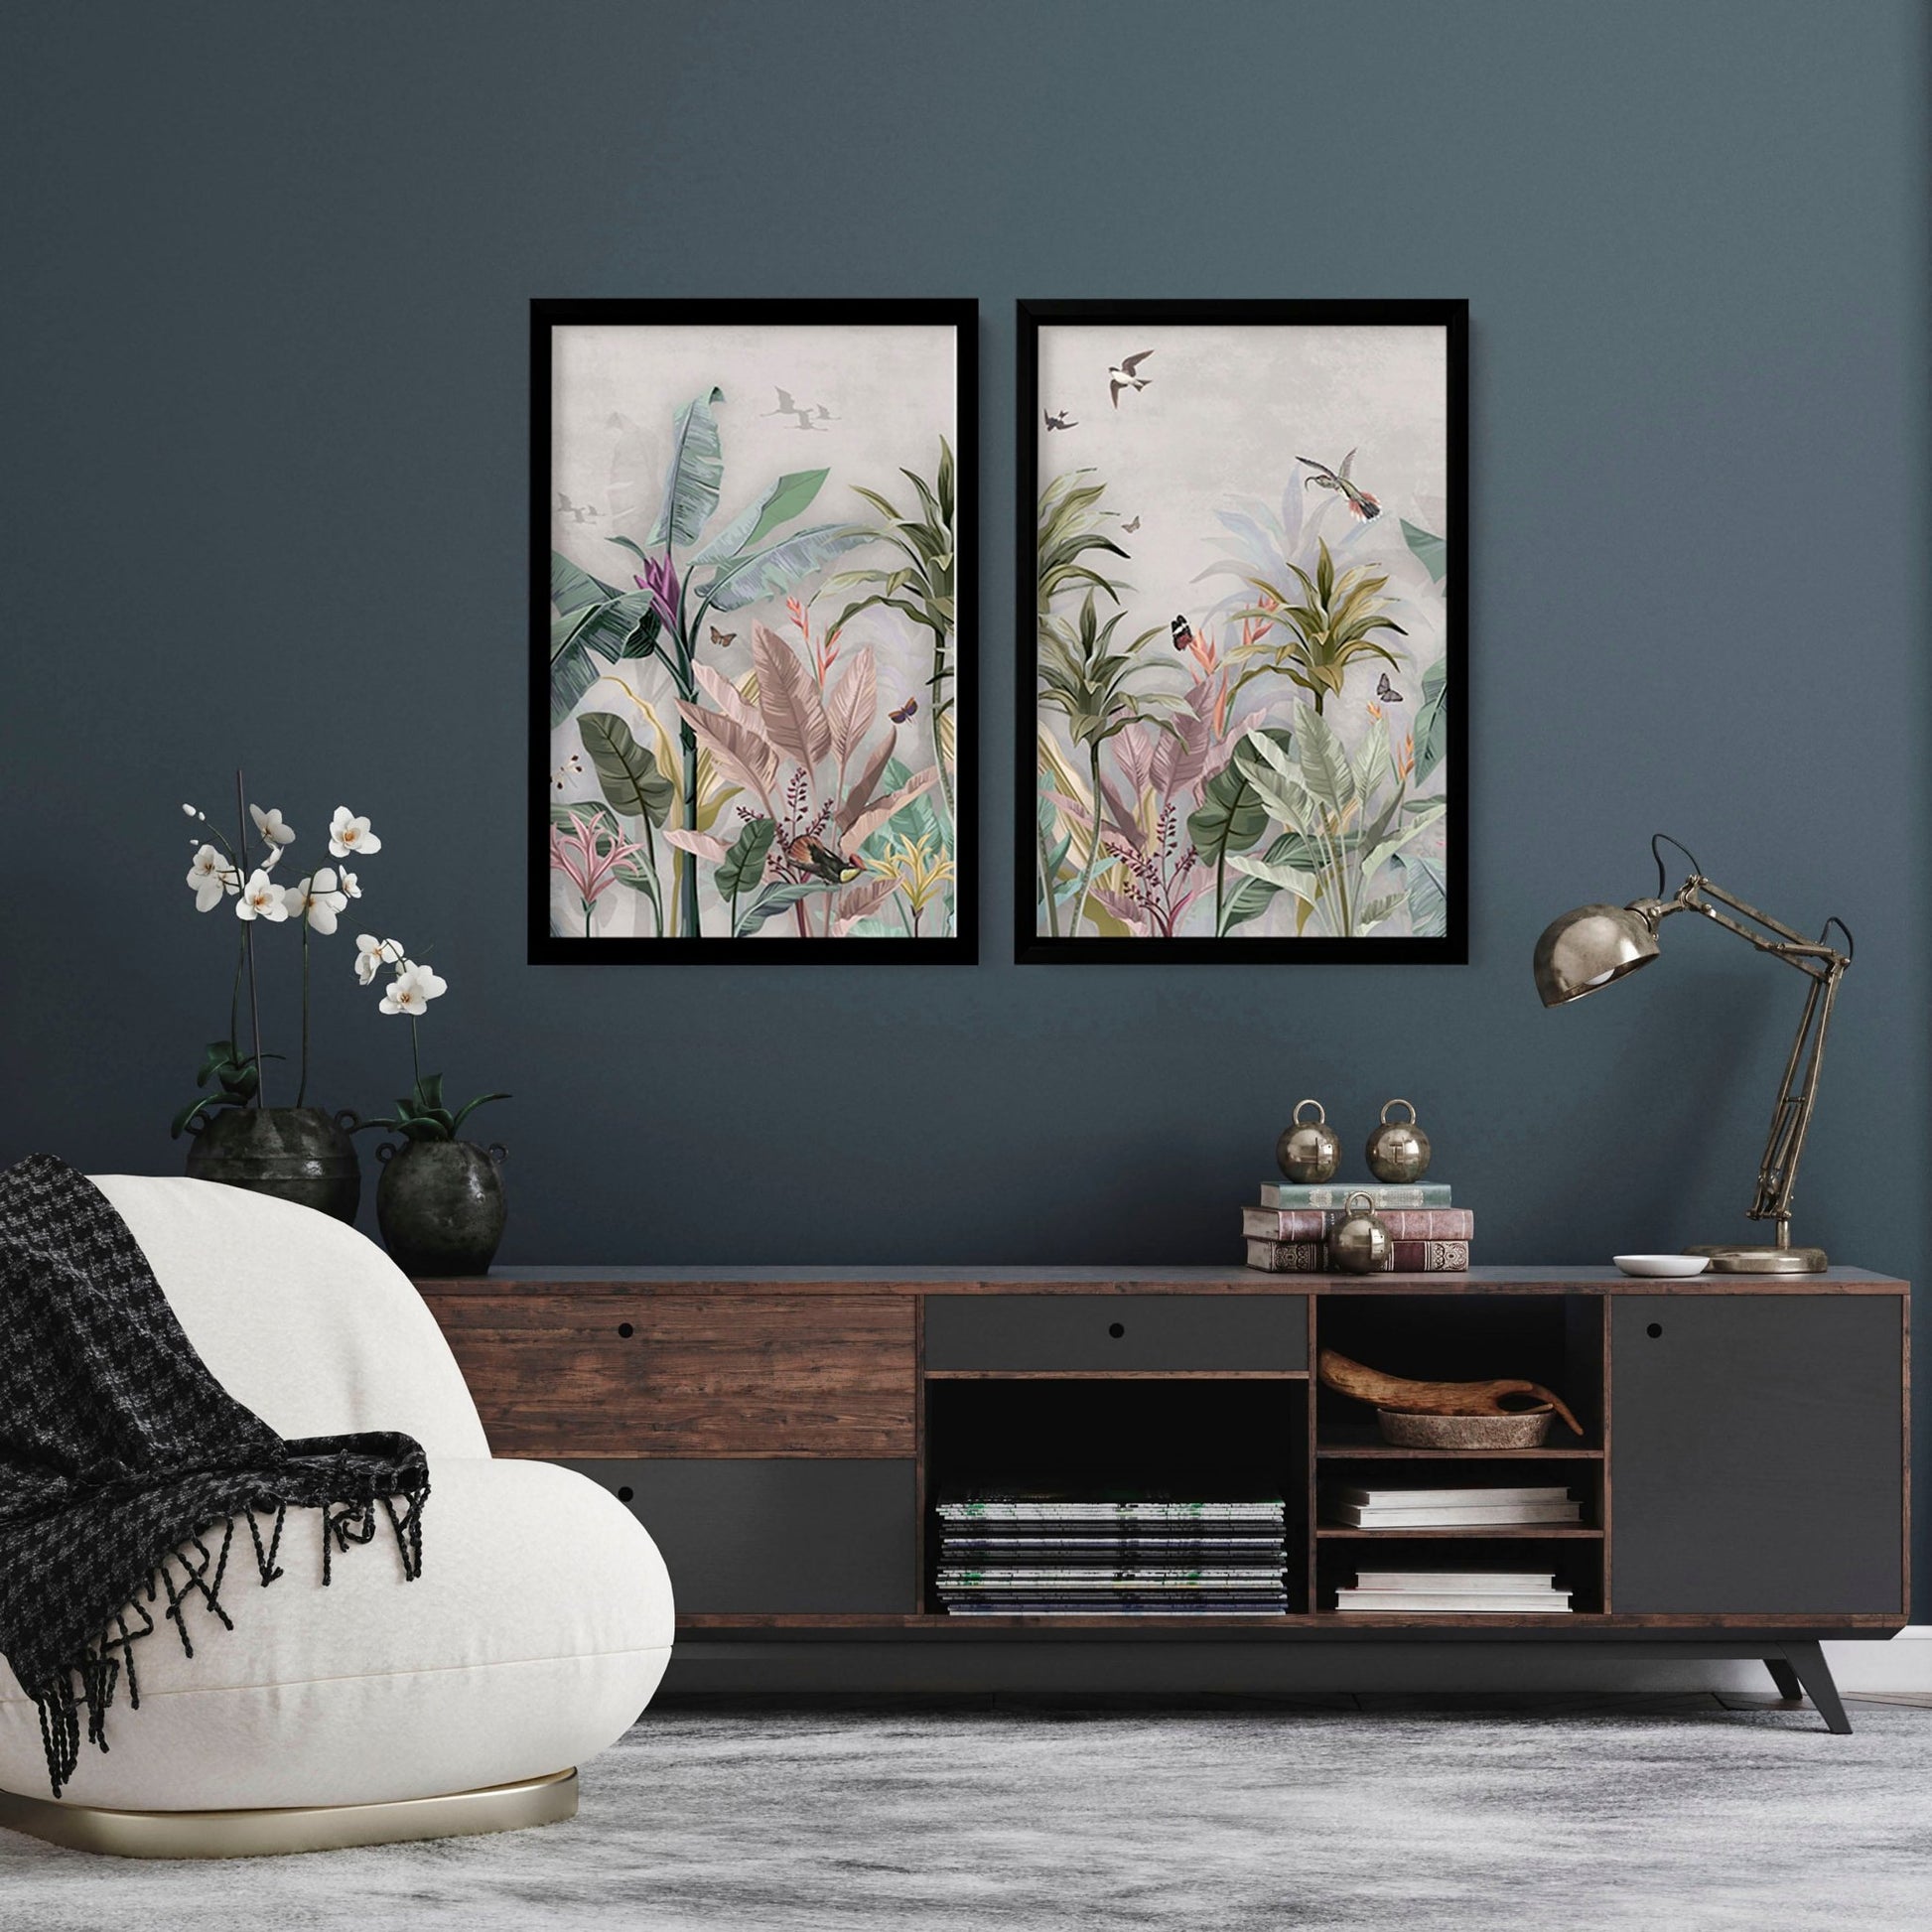 Asian Living room wall pictures | Set of 2 wall art prints - About Wall Art